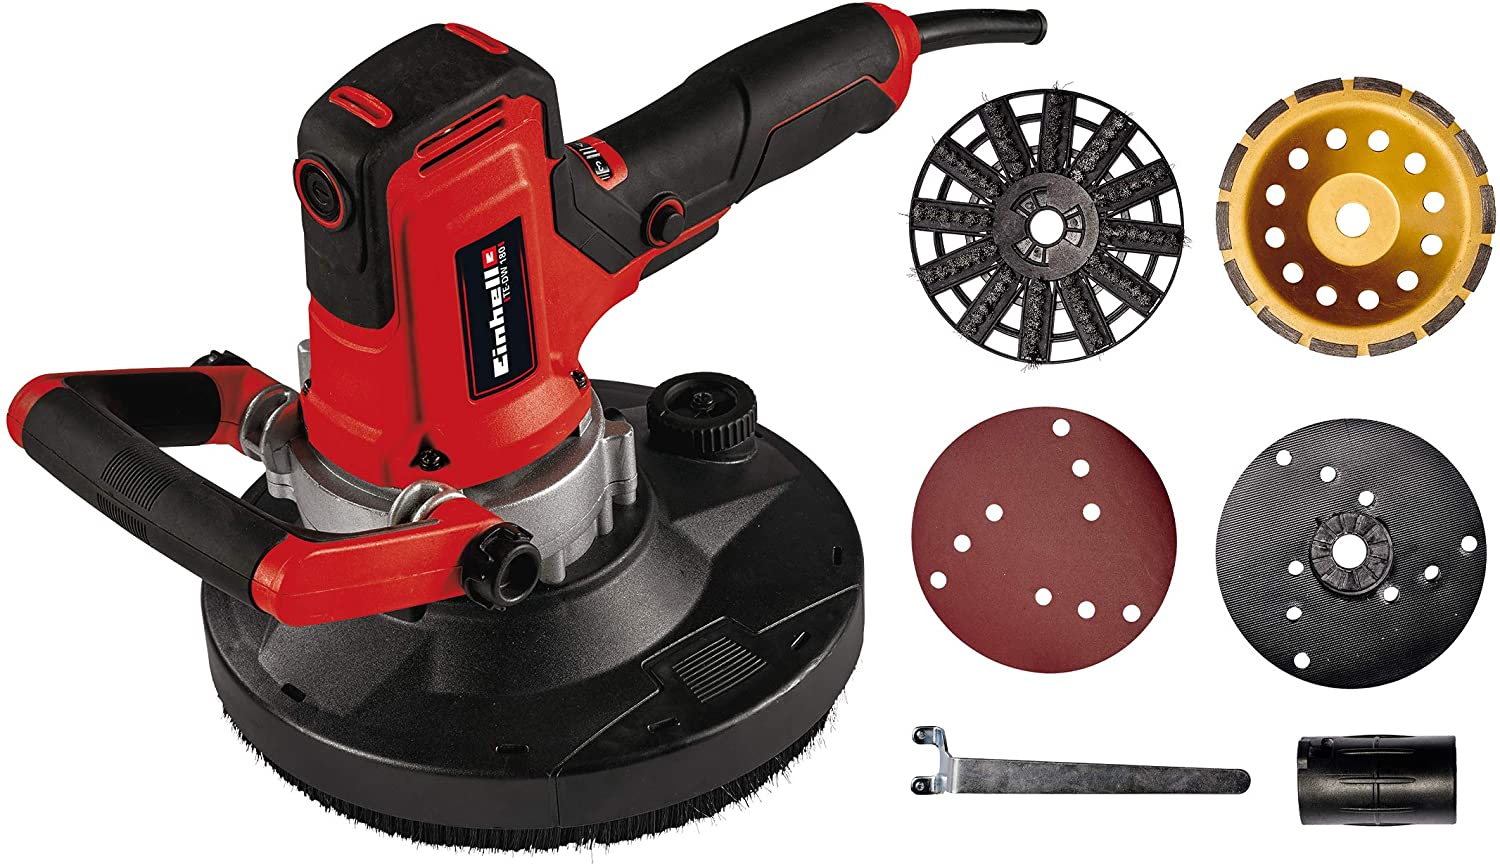 Einhell wall and concrete grinder TE-DW 180 (red/black, 1,300 watts)